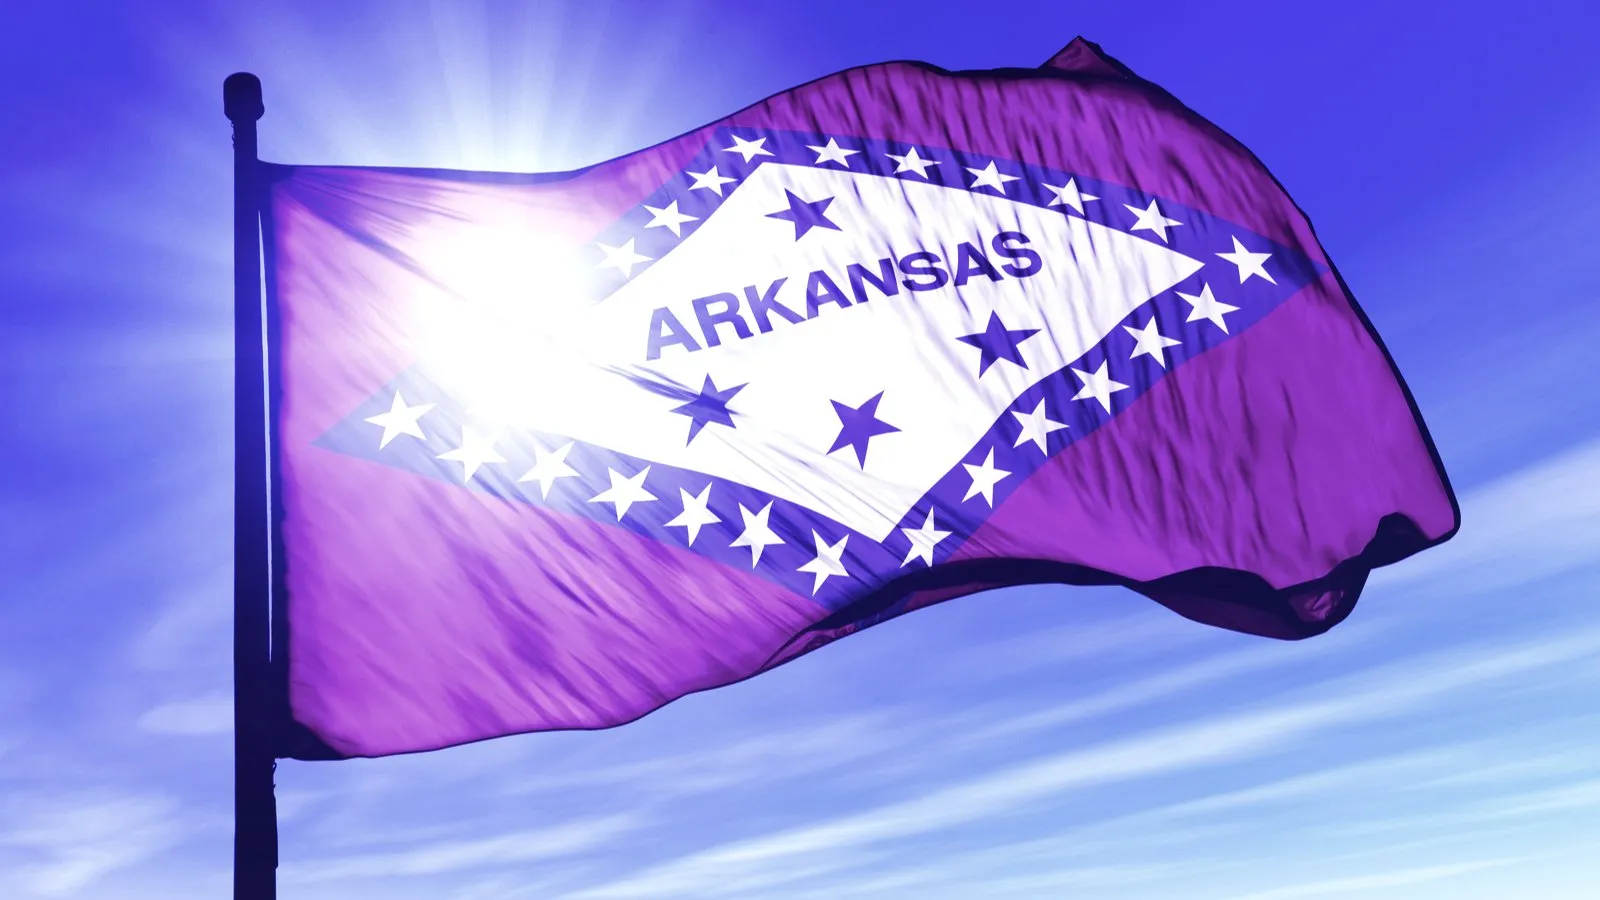 A region in the state of Arkansas is offering a Bitcoin incentive to move there. Image: Shutterstock